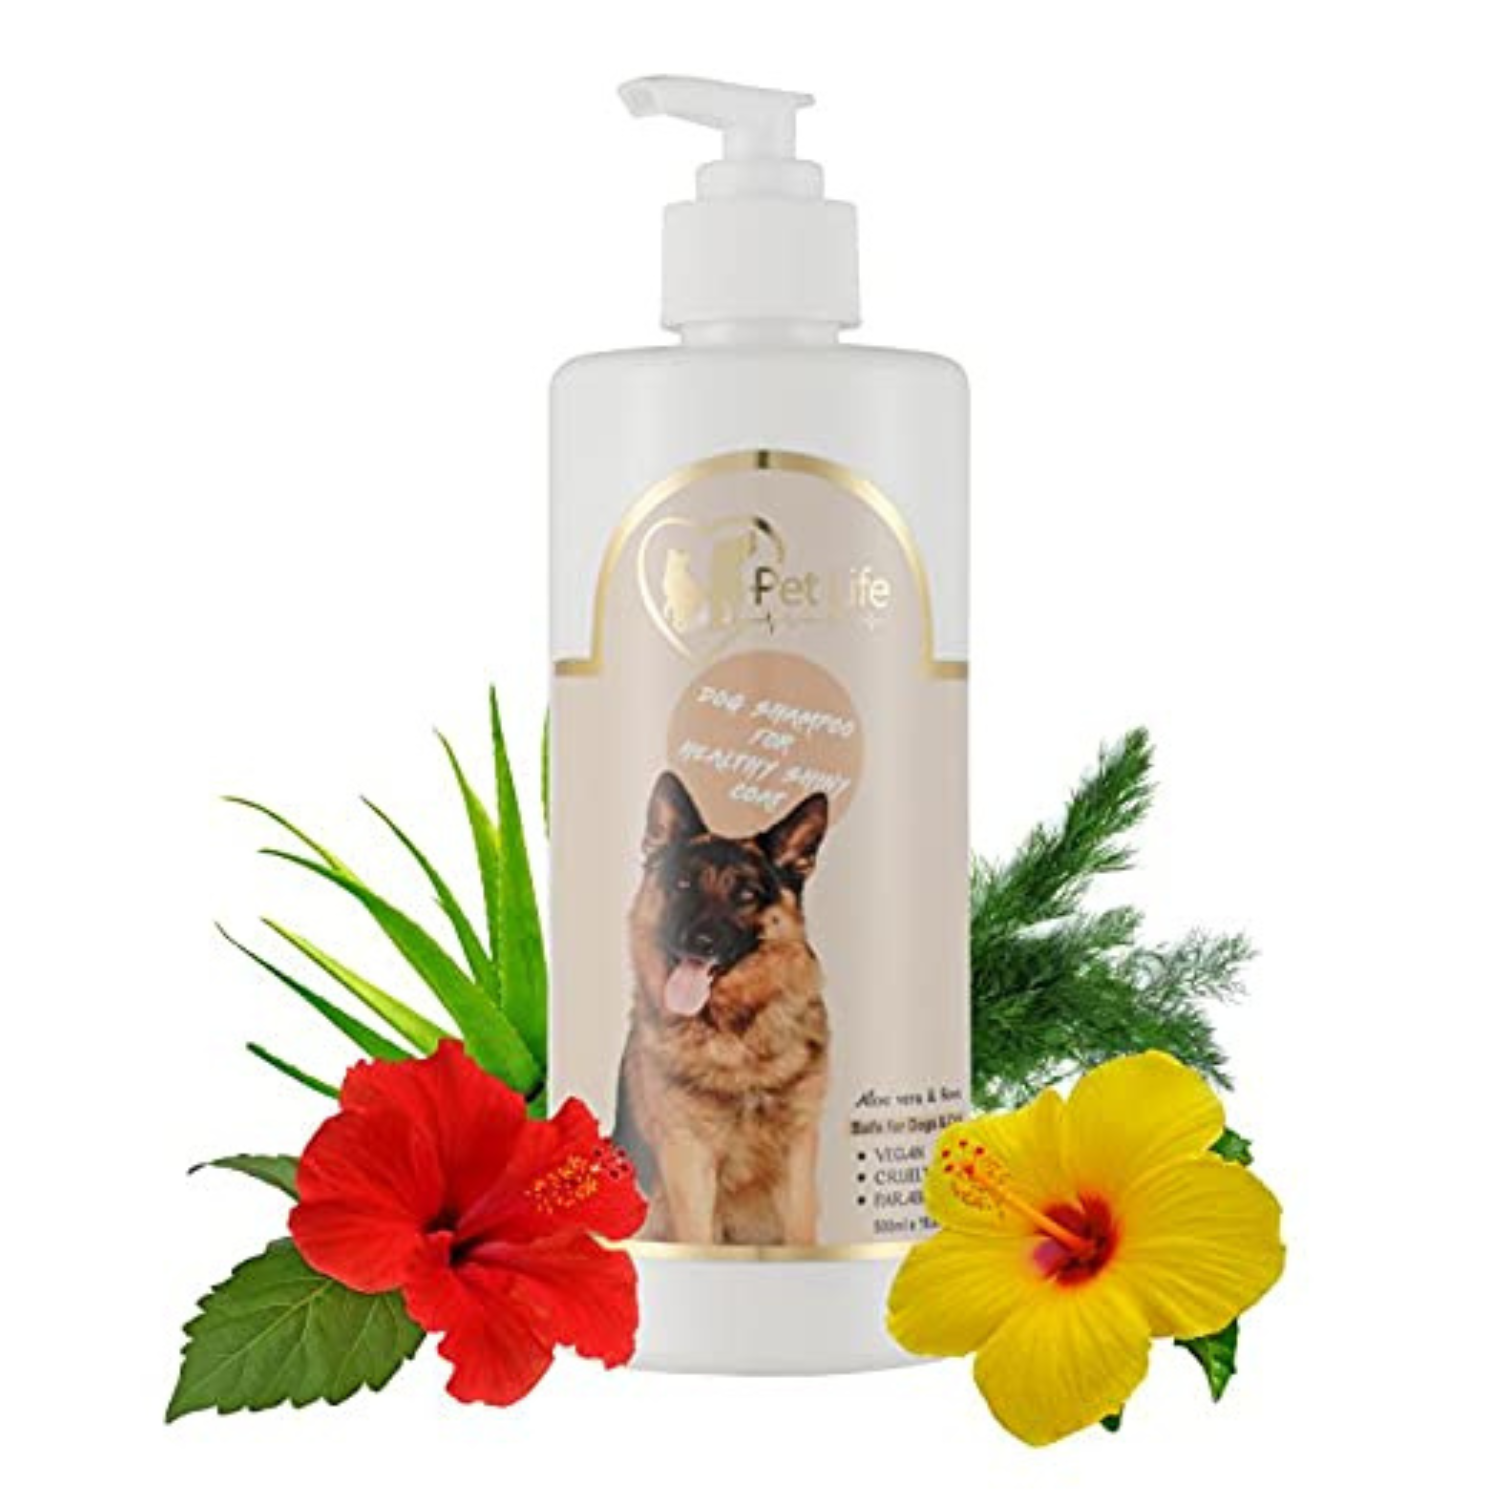 Pet Life Pure Organic Dog Shampoo for Healthy Shiny Coat for Dogs & Puppy Nourishing Hair, Healthy Coat & Shiny Body Wash – for All Dogs Breeds (500 ML)